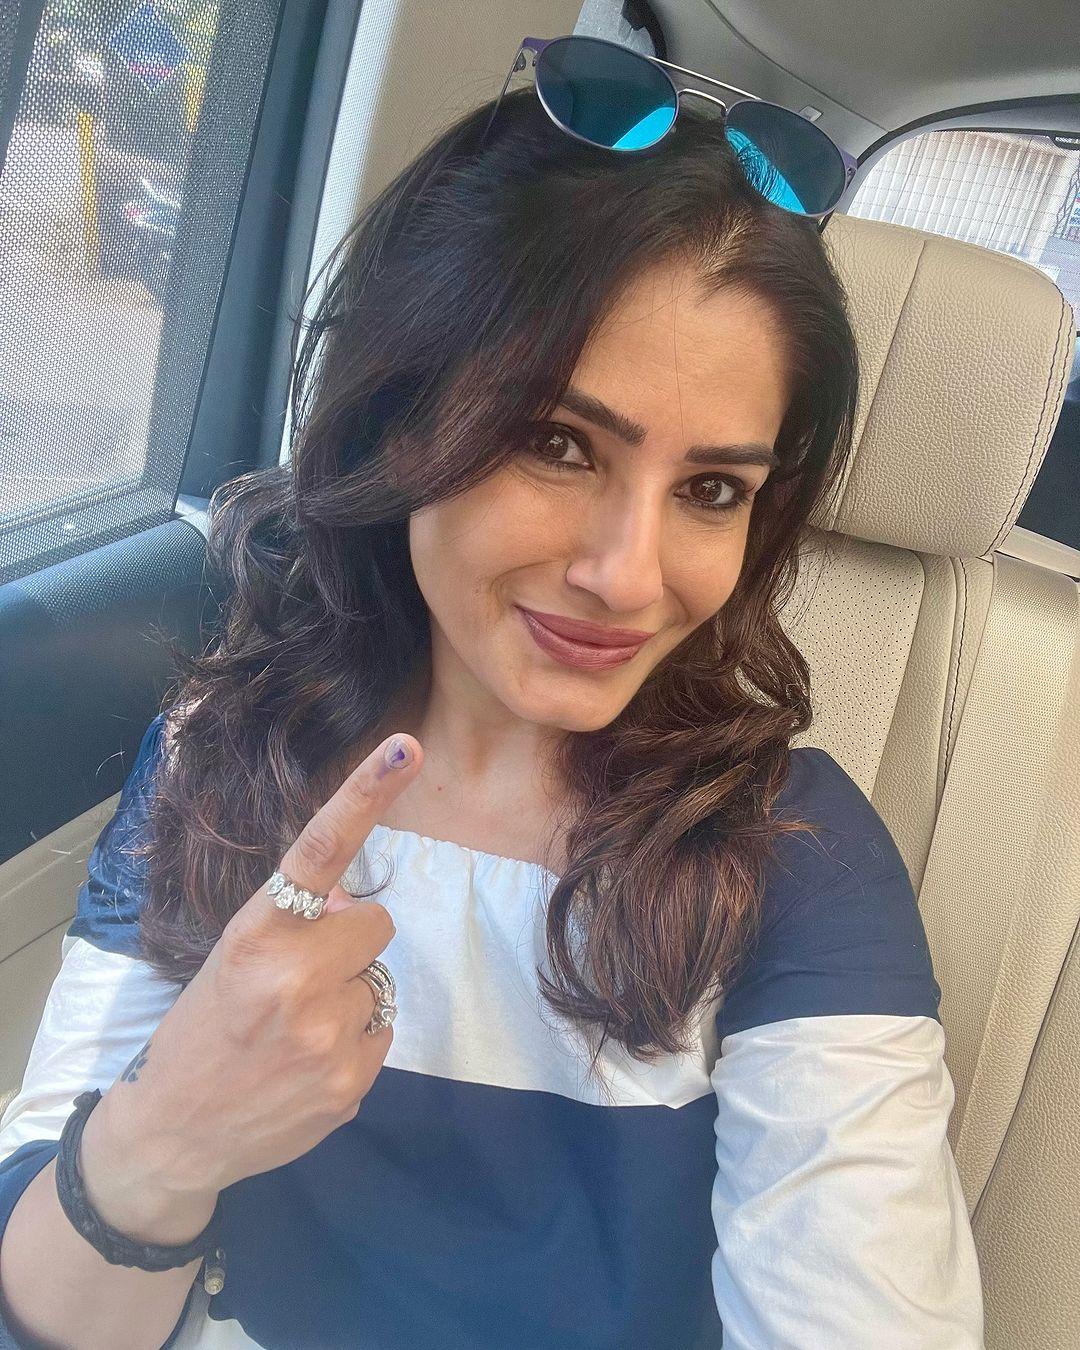 Raveena Tandon also understood the importance of voting and exercised her voting right